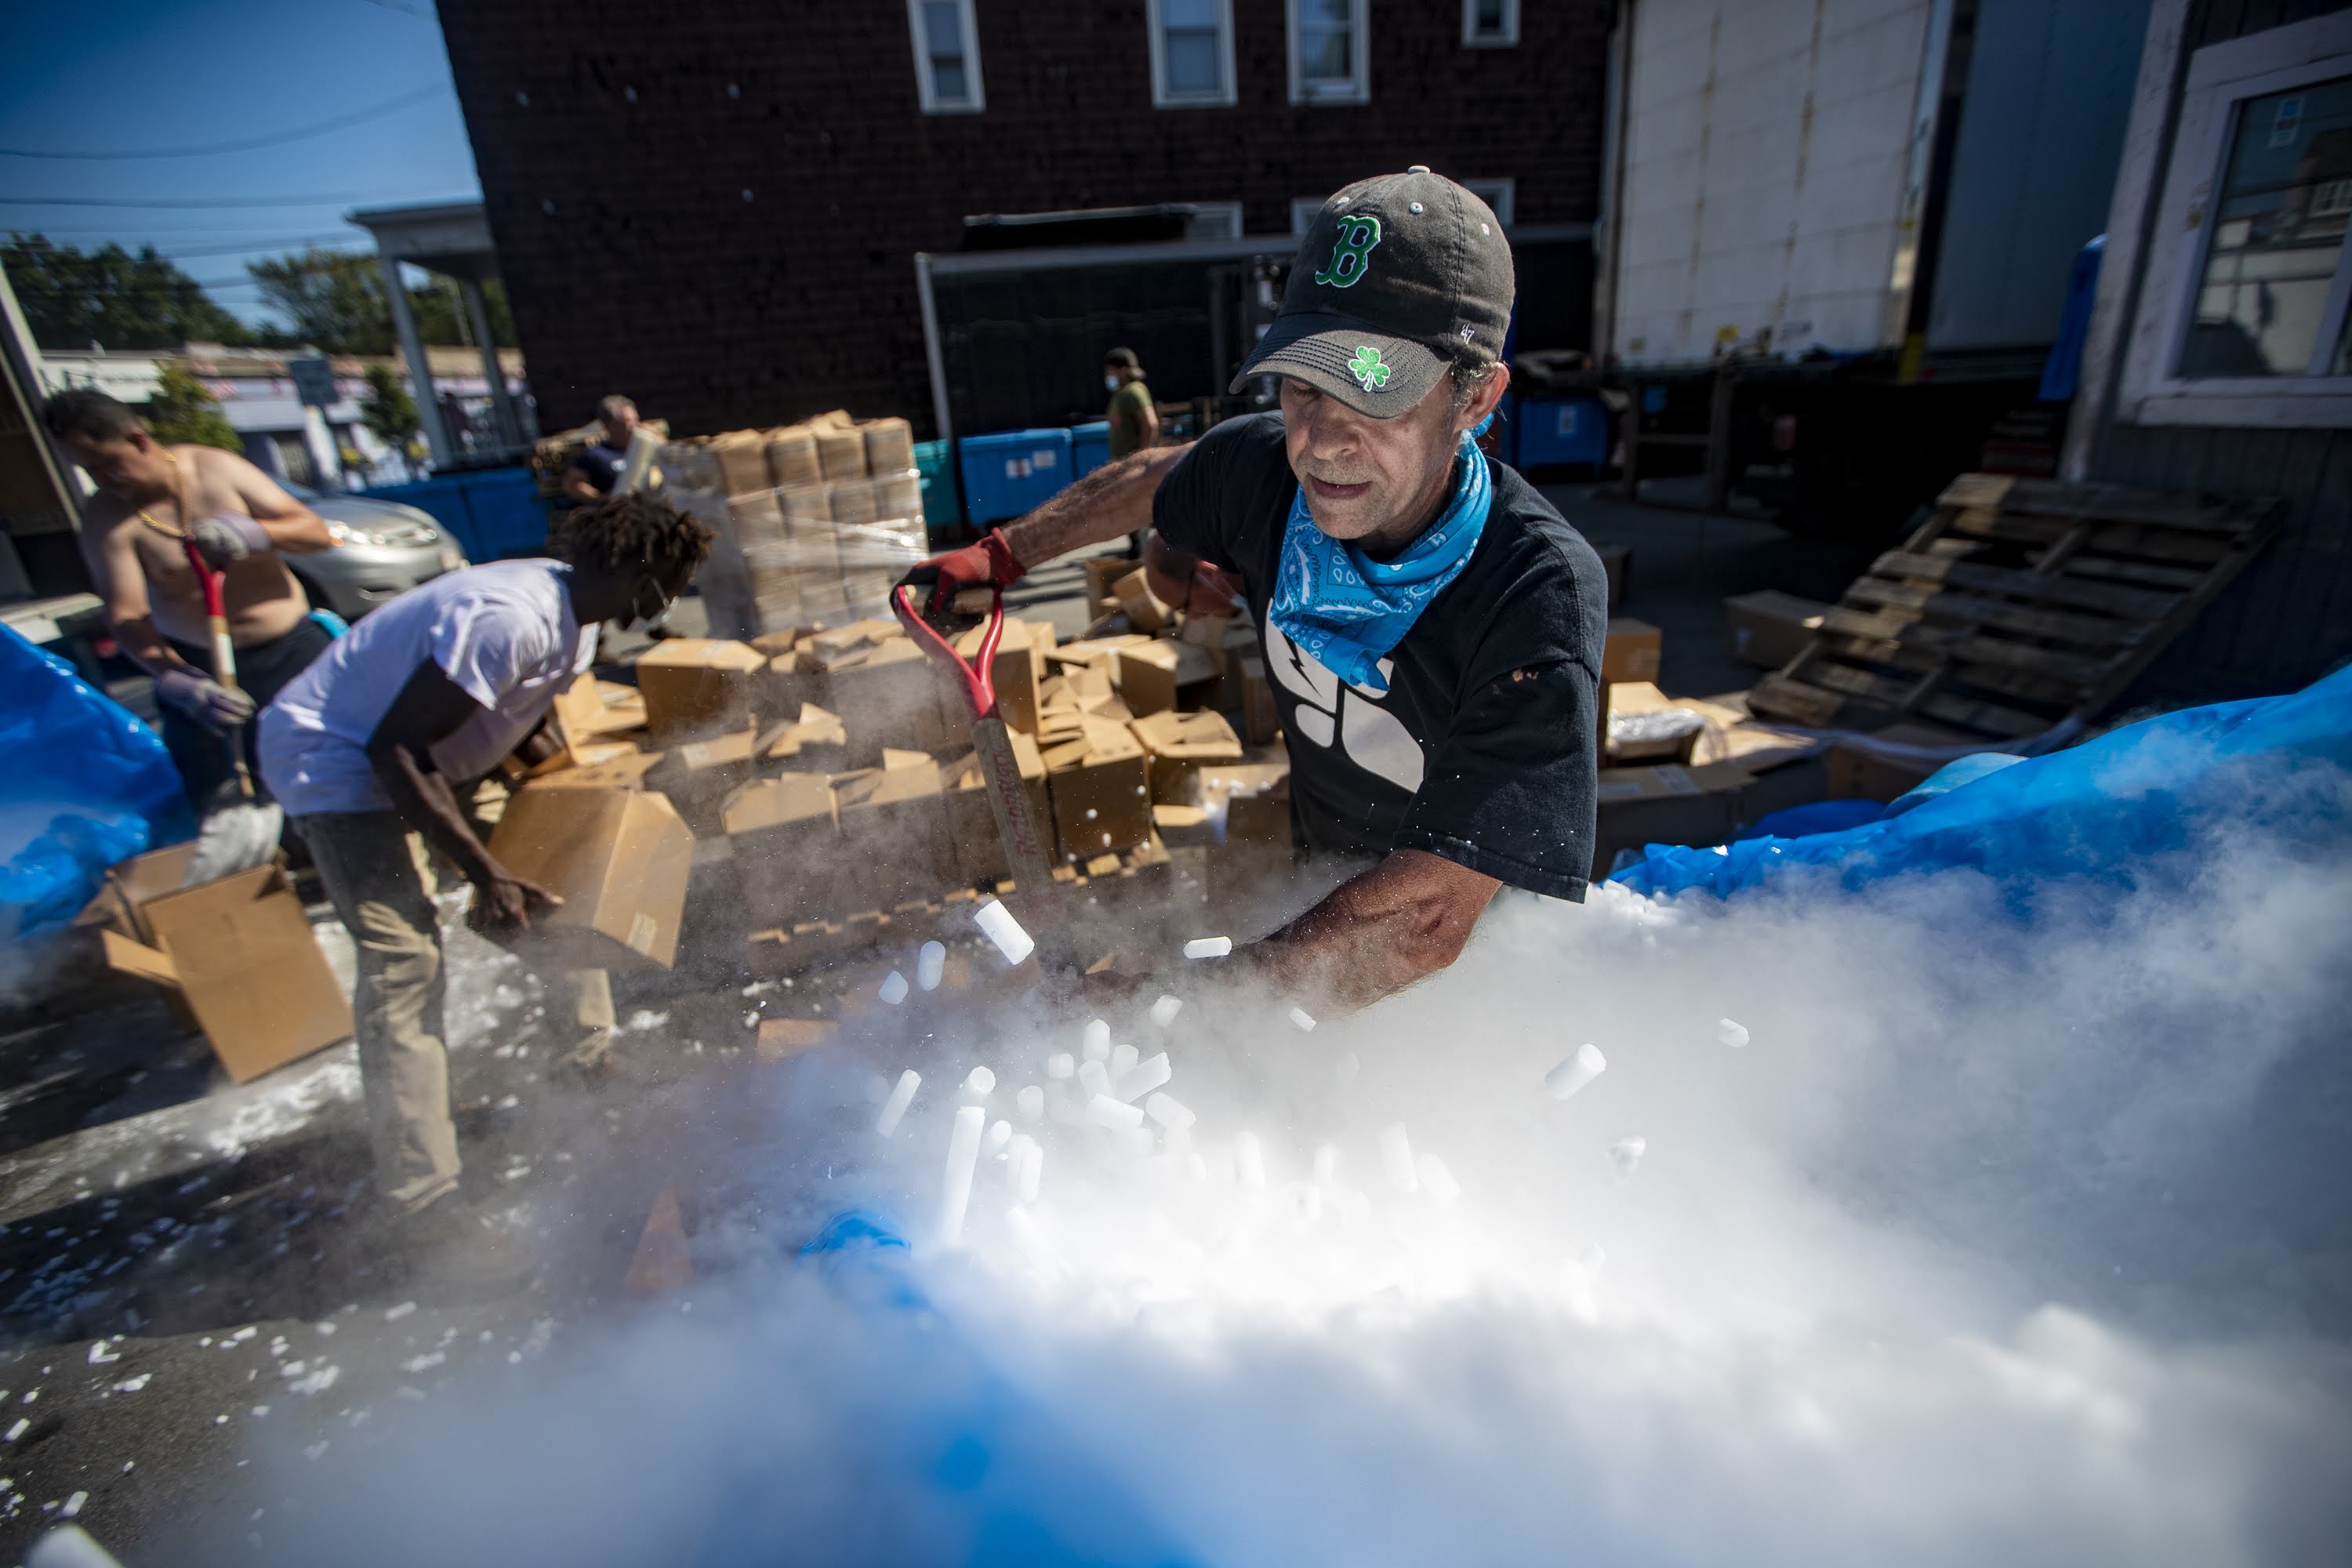 Workers at Acme Ice Company in Cambridge load 50,000 pounds of dry ice into boxes to be shipped out to various pharmaceutical companies in the area for storing vaccine samples of COVID-19. (Jesse Costa/WBUR)